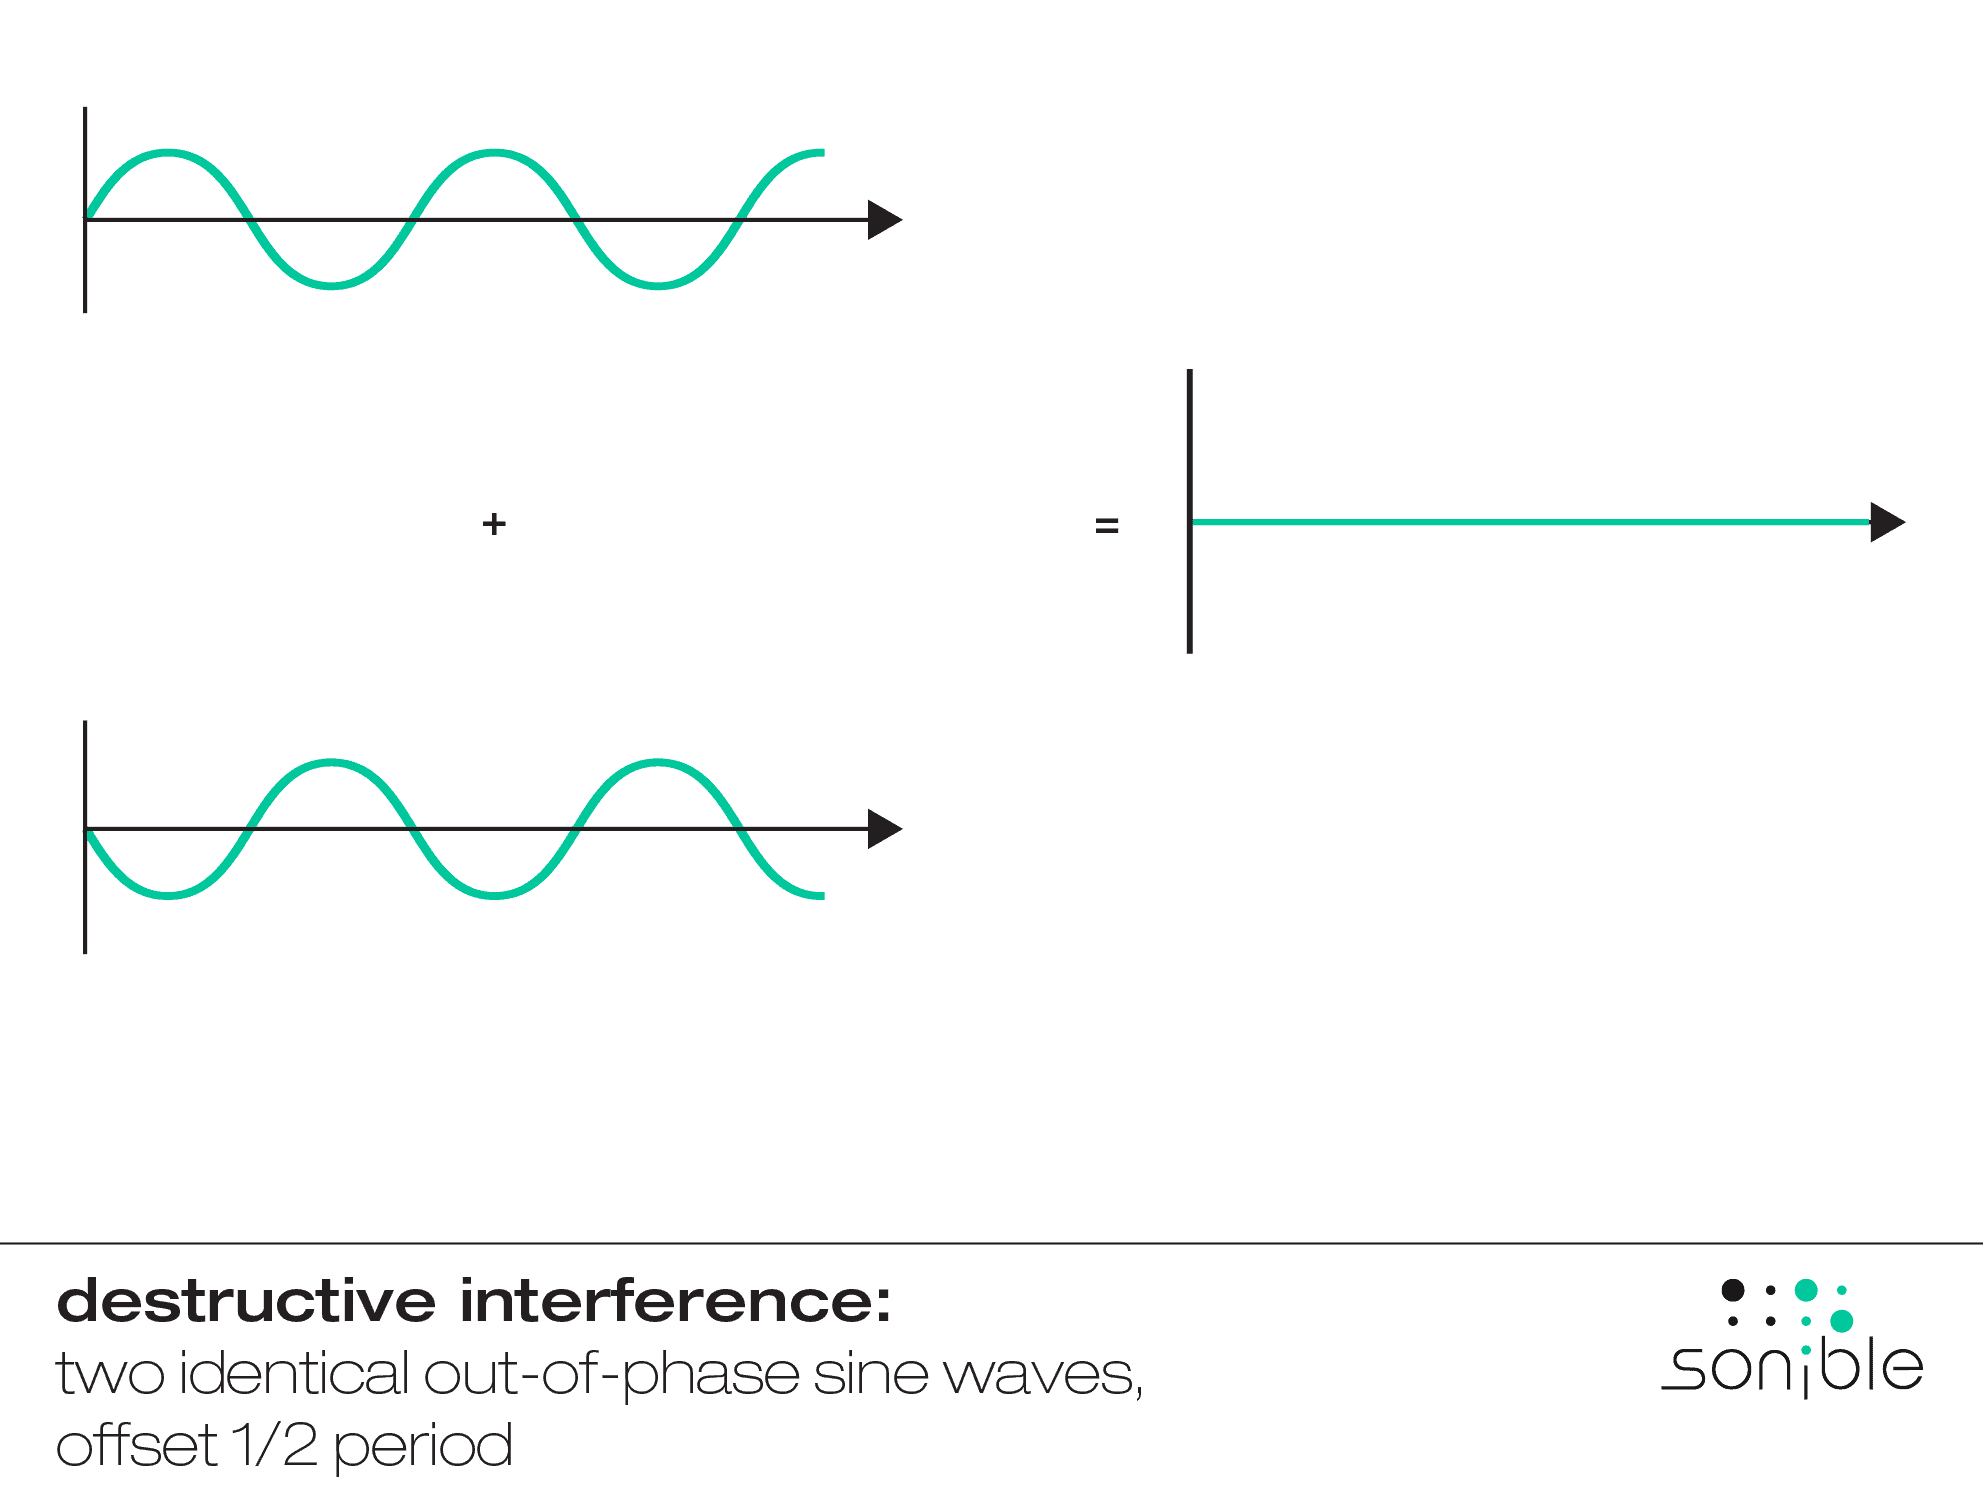 destructive interference occurs when two identical out-of-phase sine waves with an 1/2 period offset are added together 